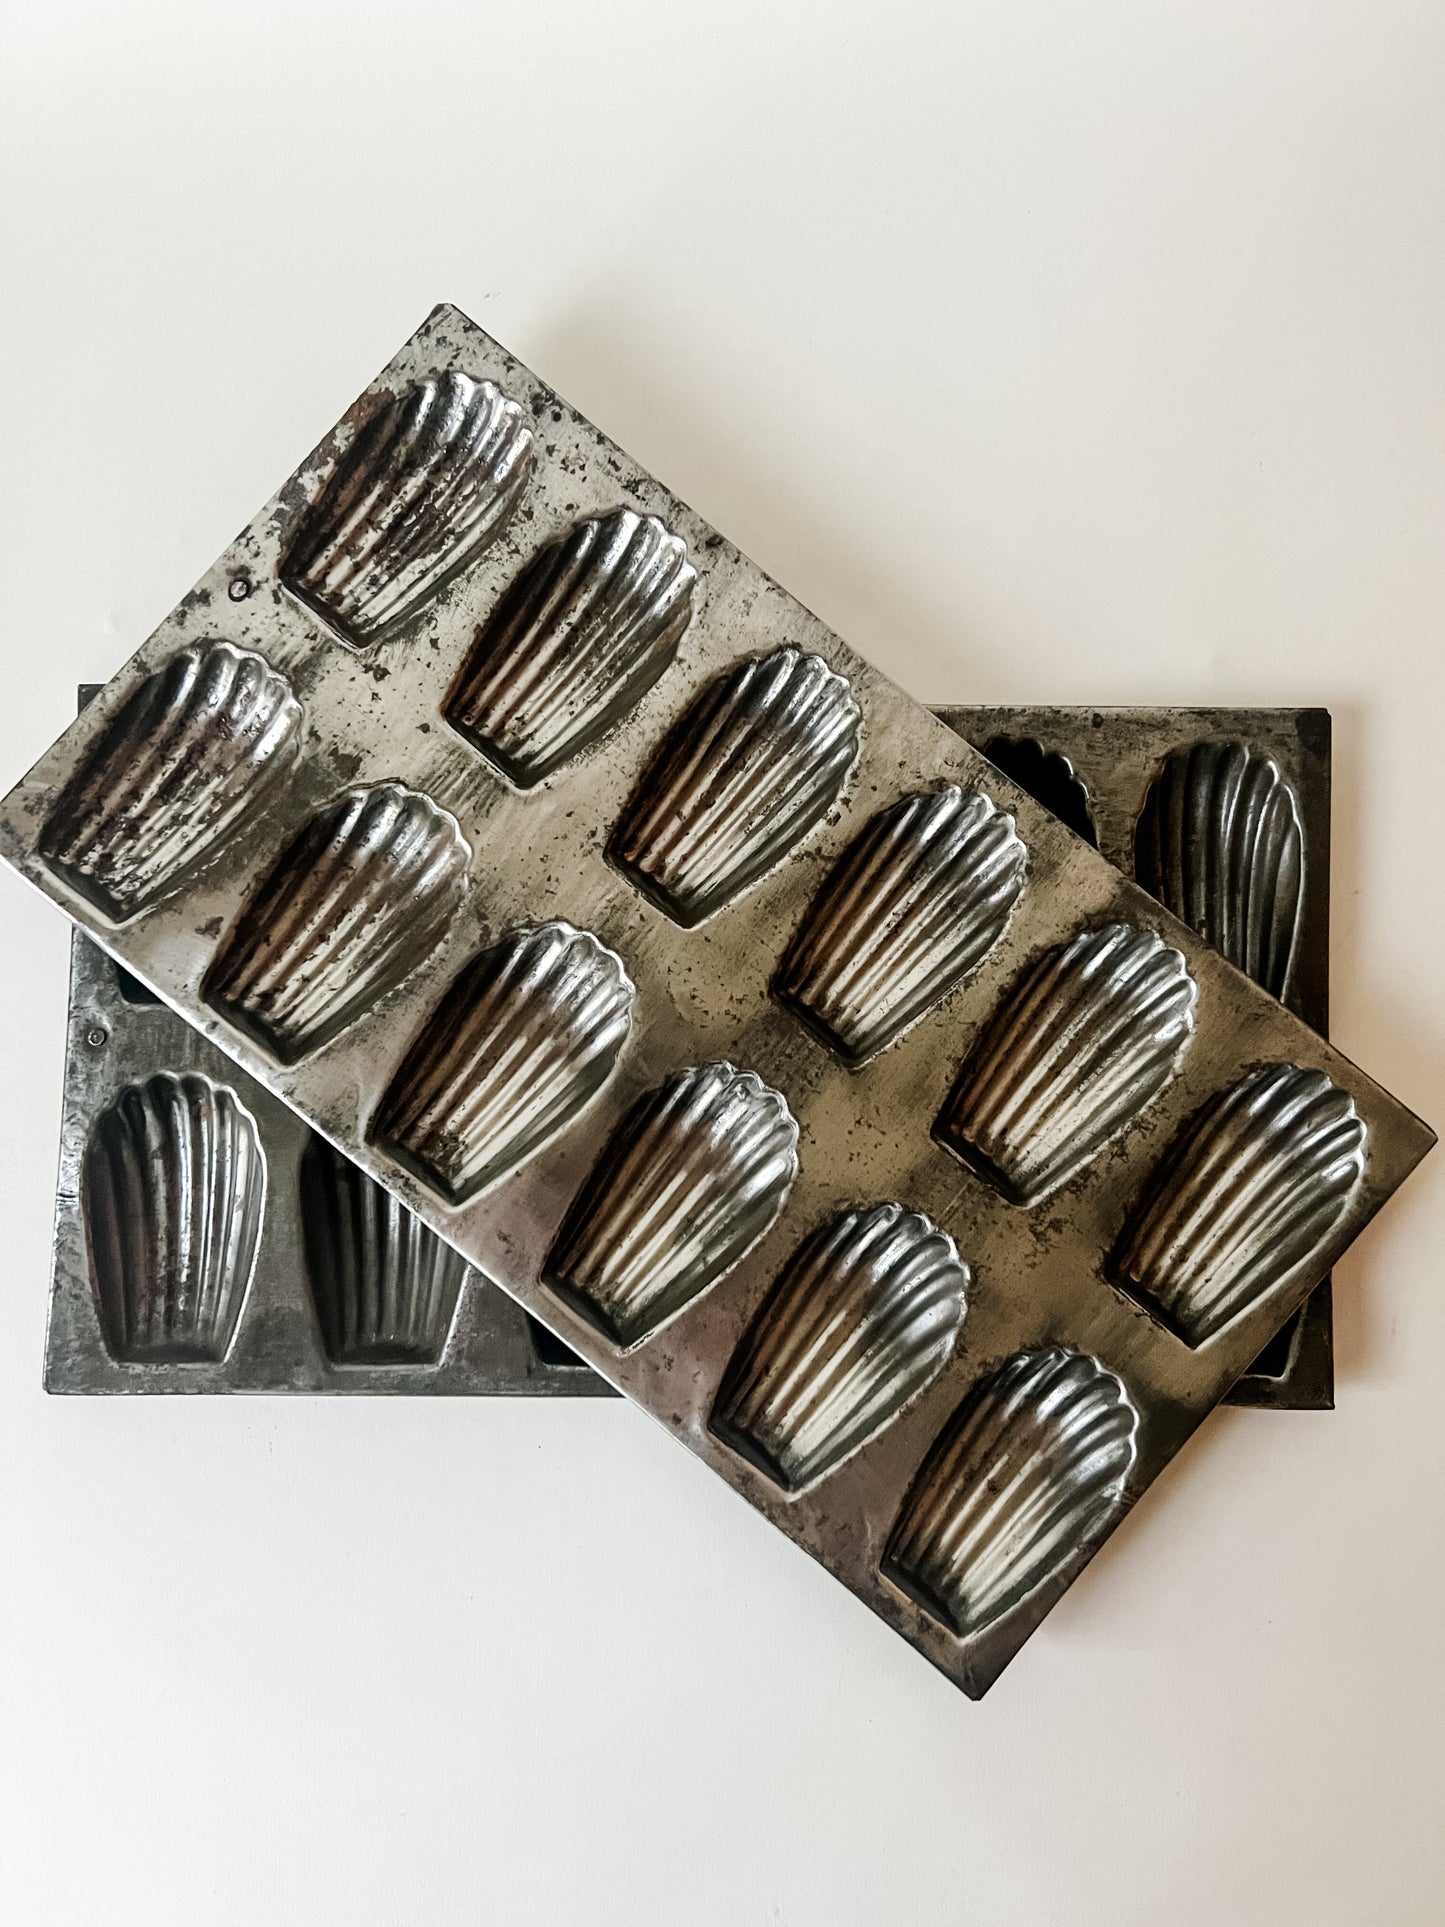 Vintage French Madeleine Pan (Moule a Madeleines)